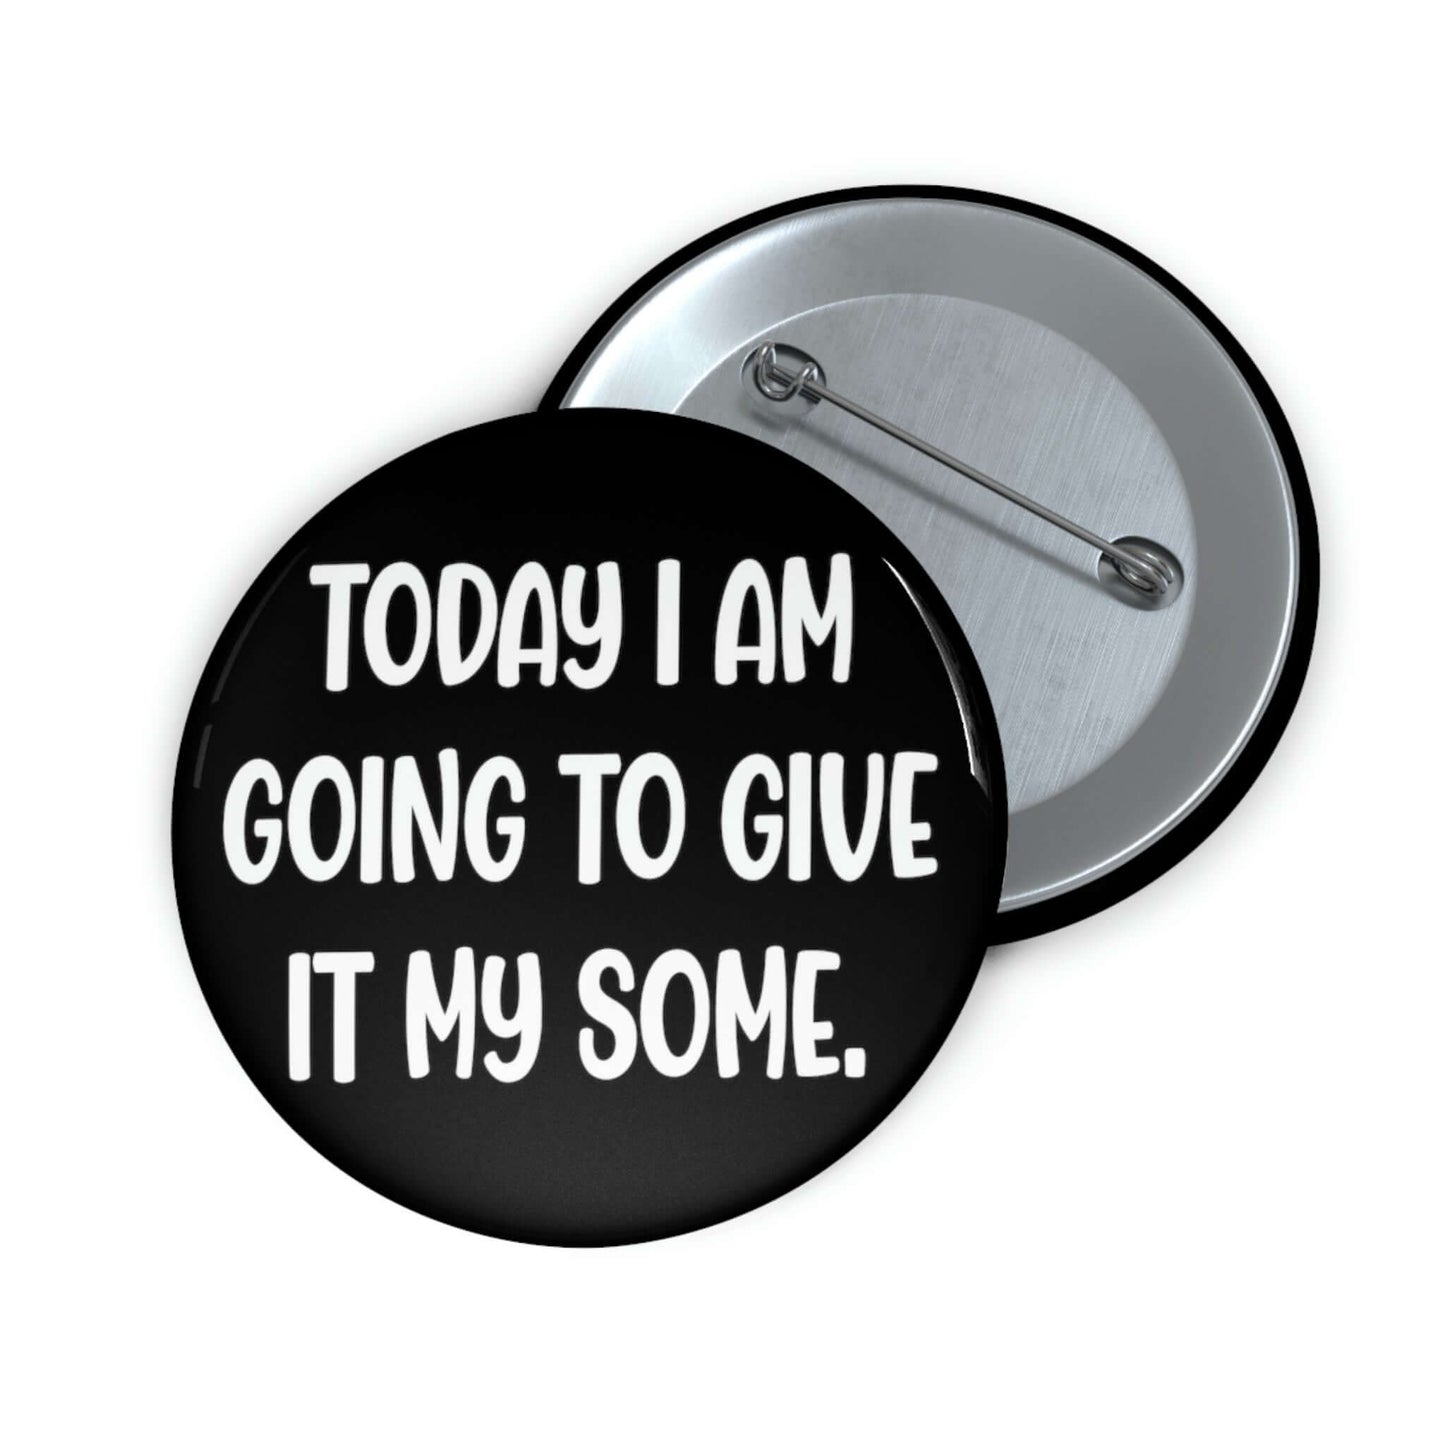 Give it my some pinback button